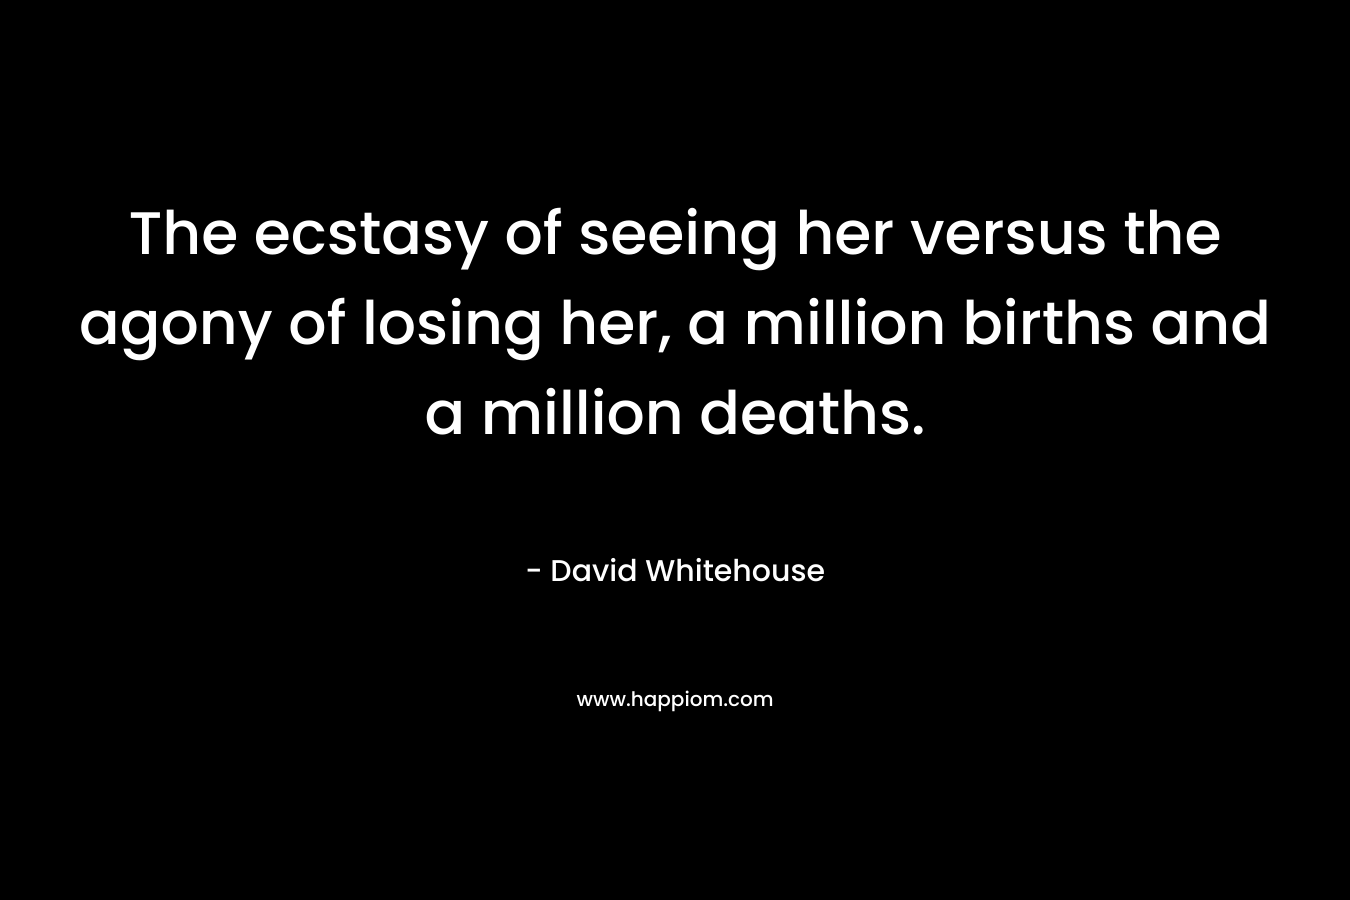 The ecstasy of seeing her versus the agony of losing her, a million births and a million deaths.